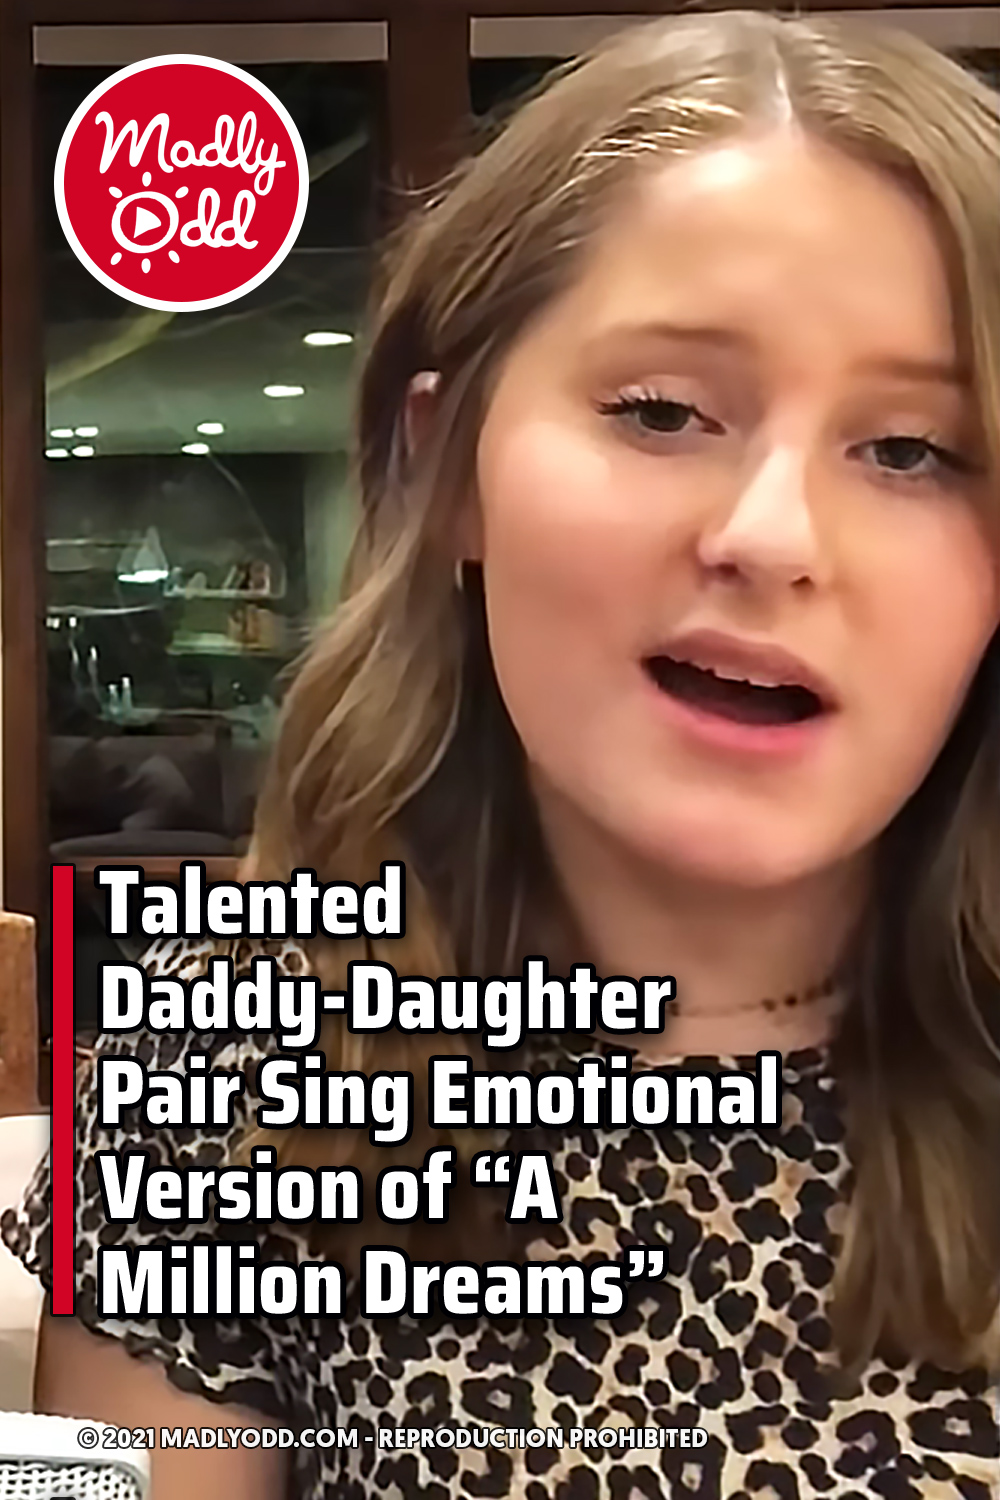 Talented Daddy-Daughter Pair Sing Emotional Version of “A Million Dreams”